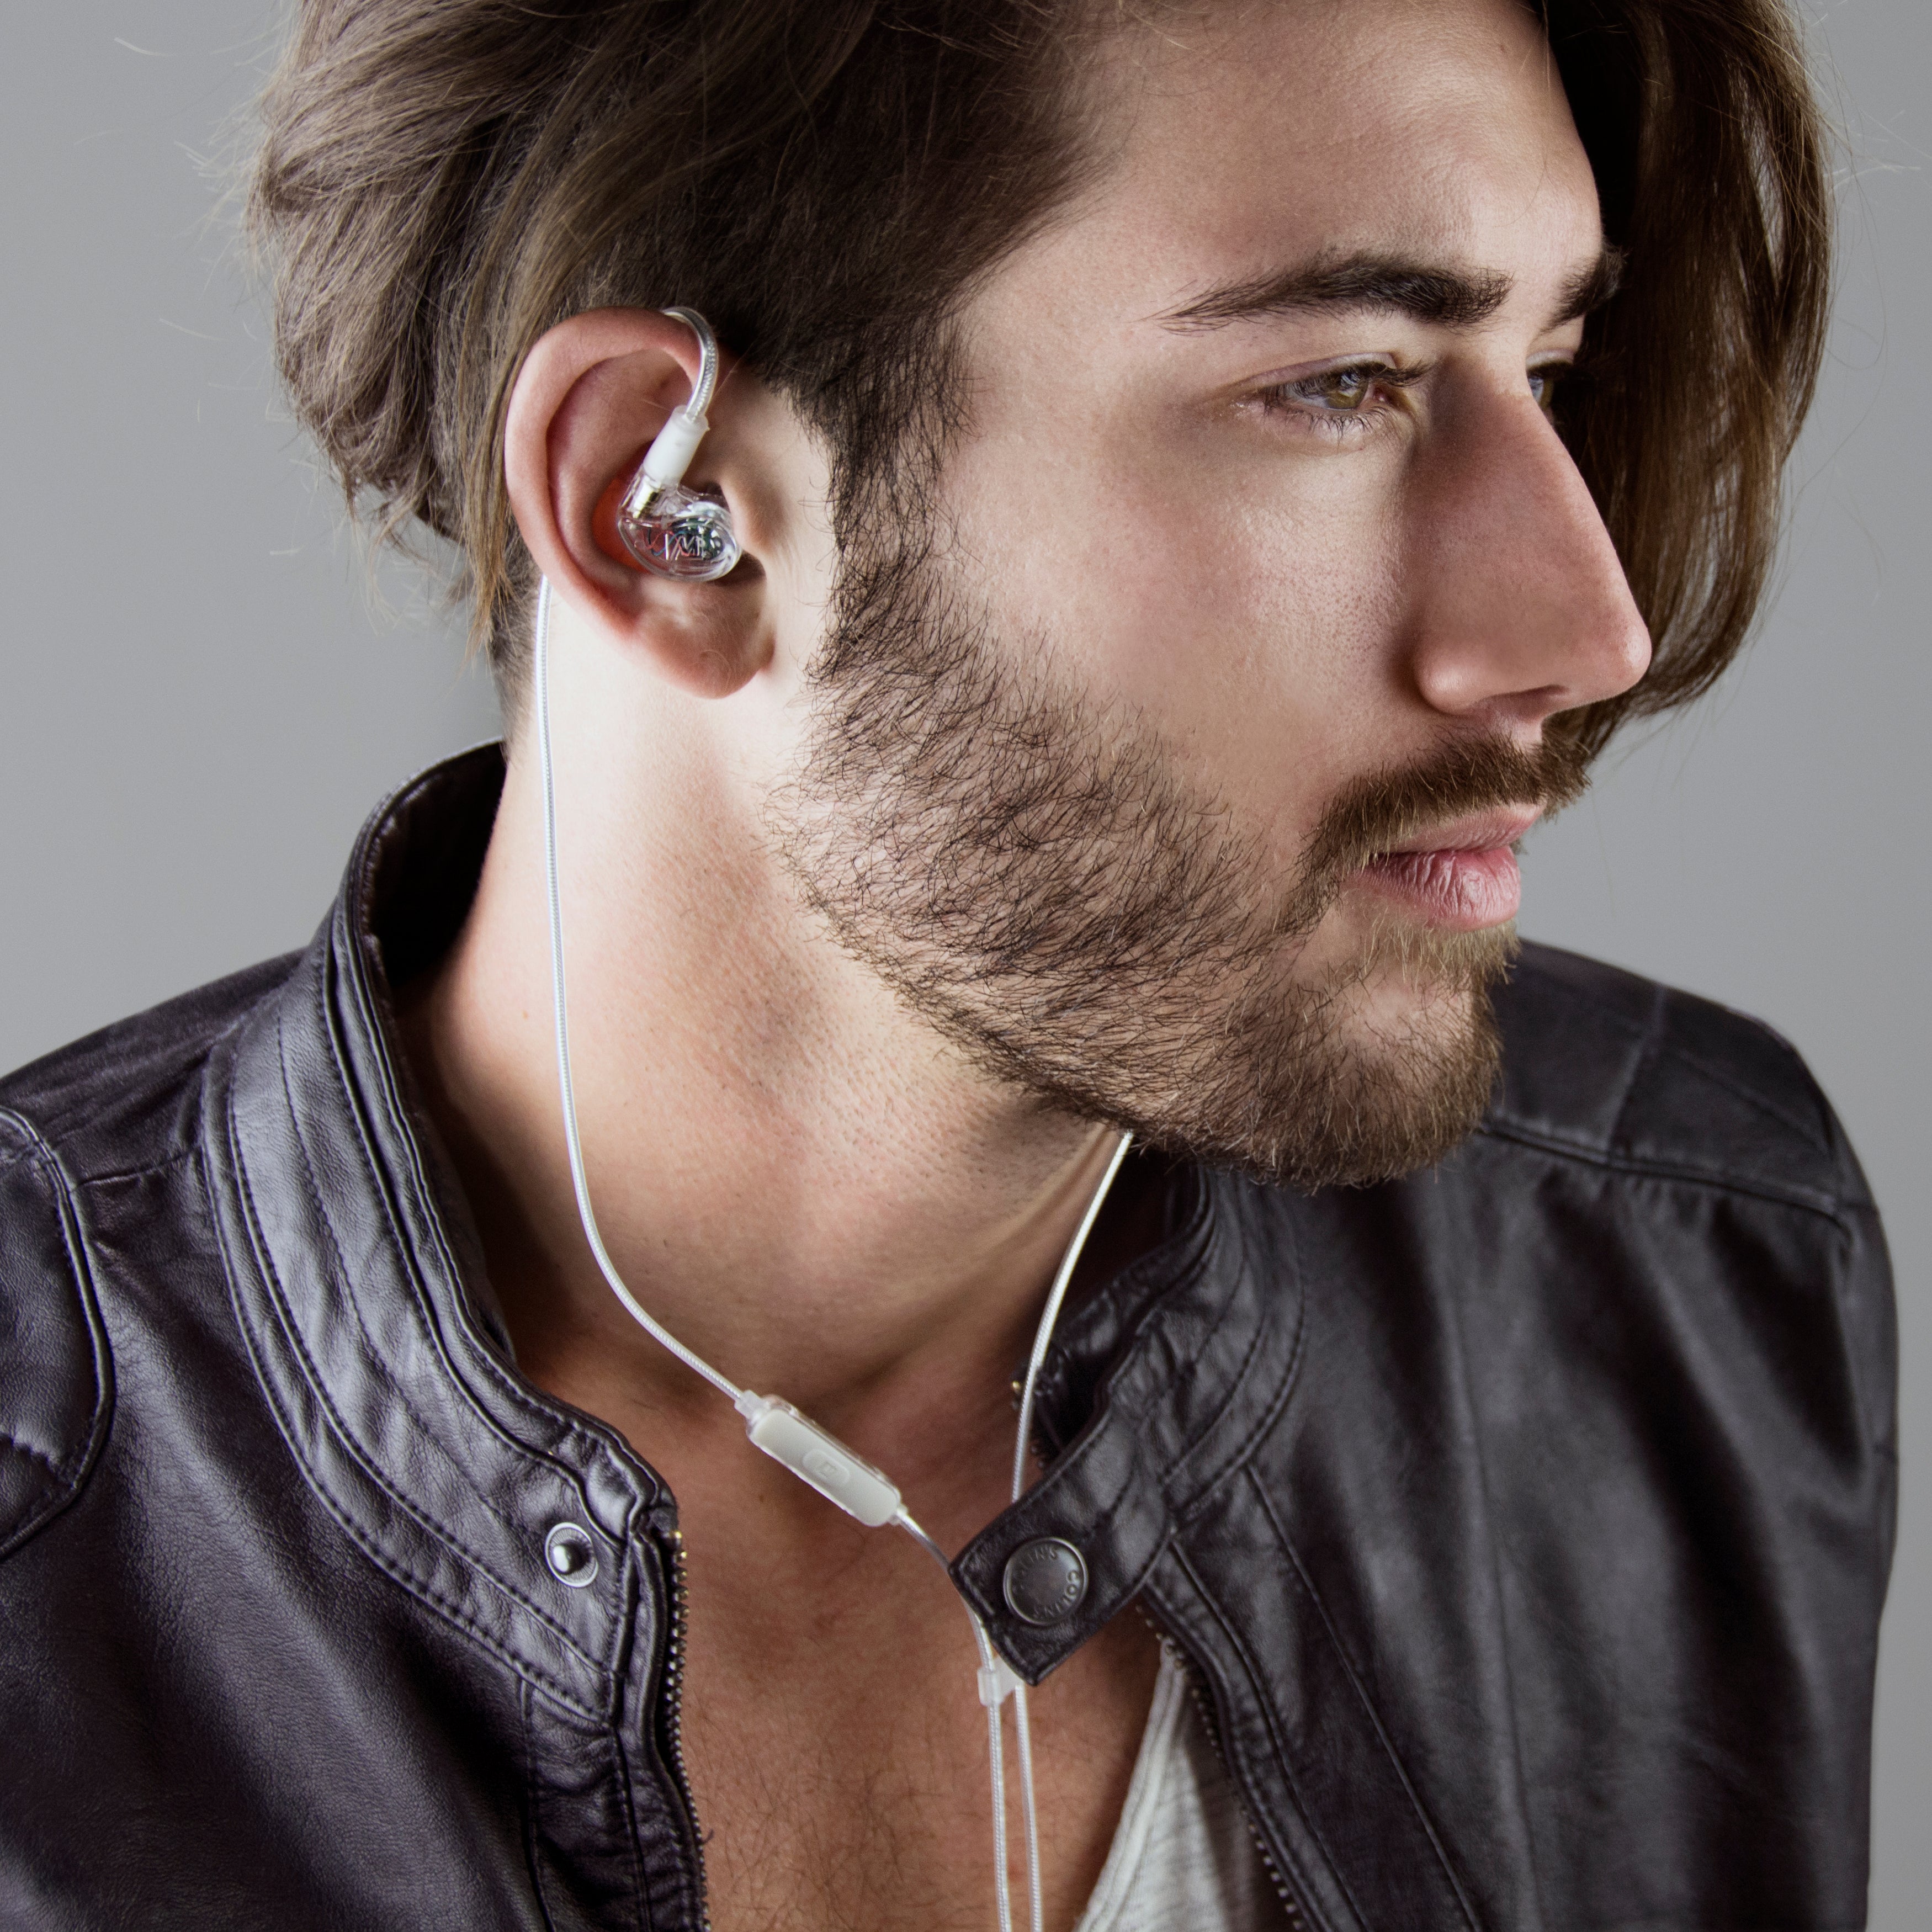 A side profile of a young man with a beard, wearing a leather jacket and white earphones, looking thoughtfully to the side.